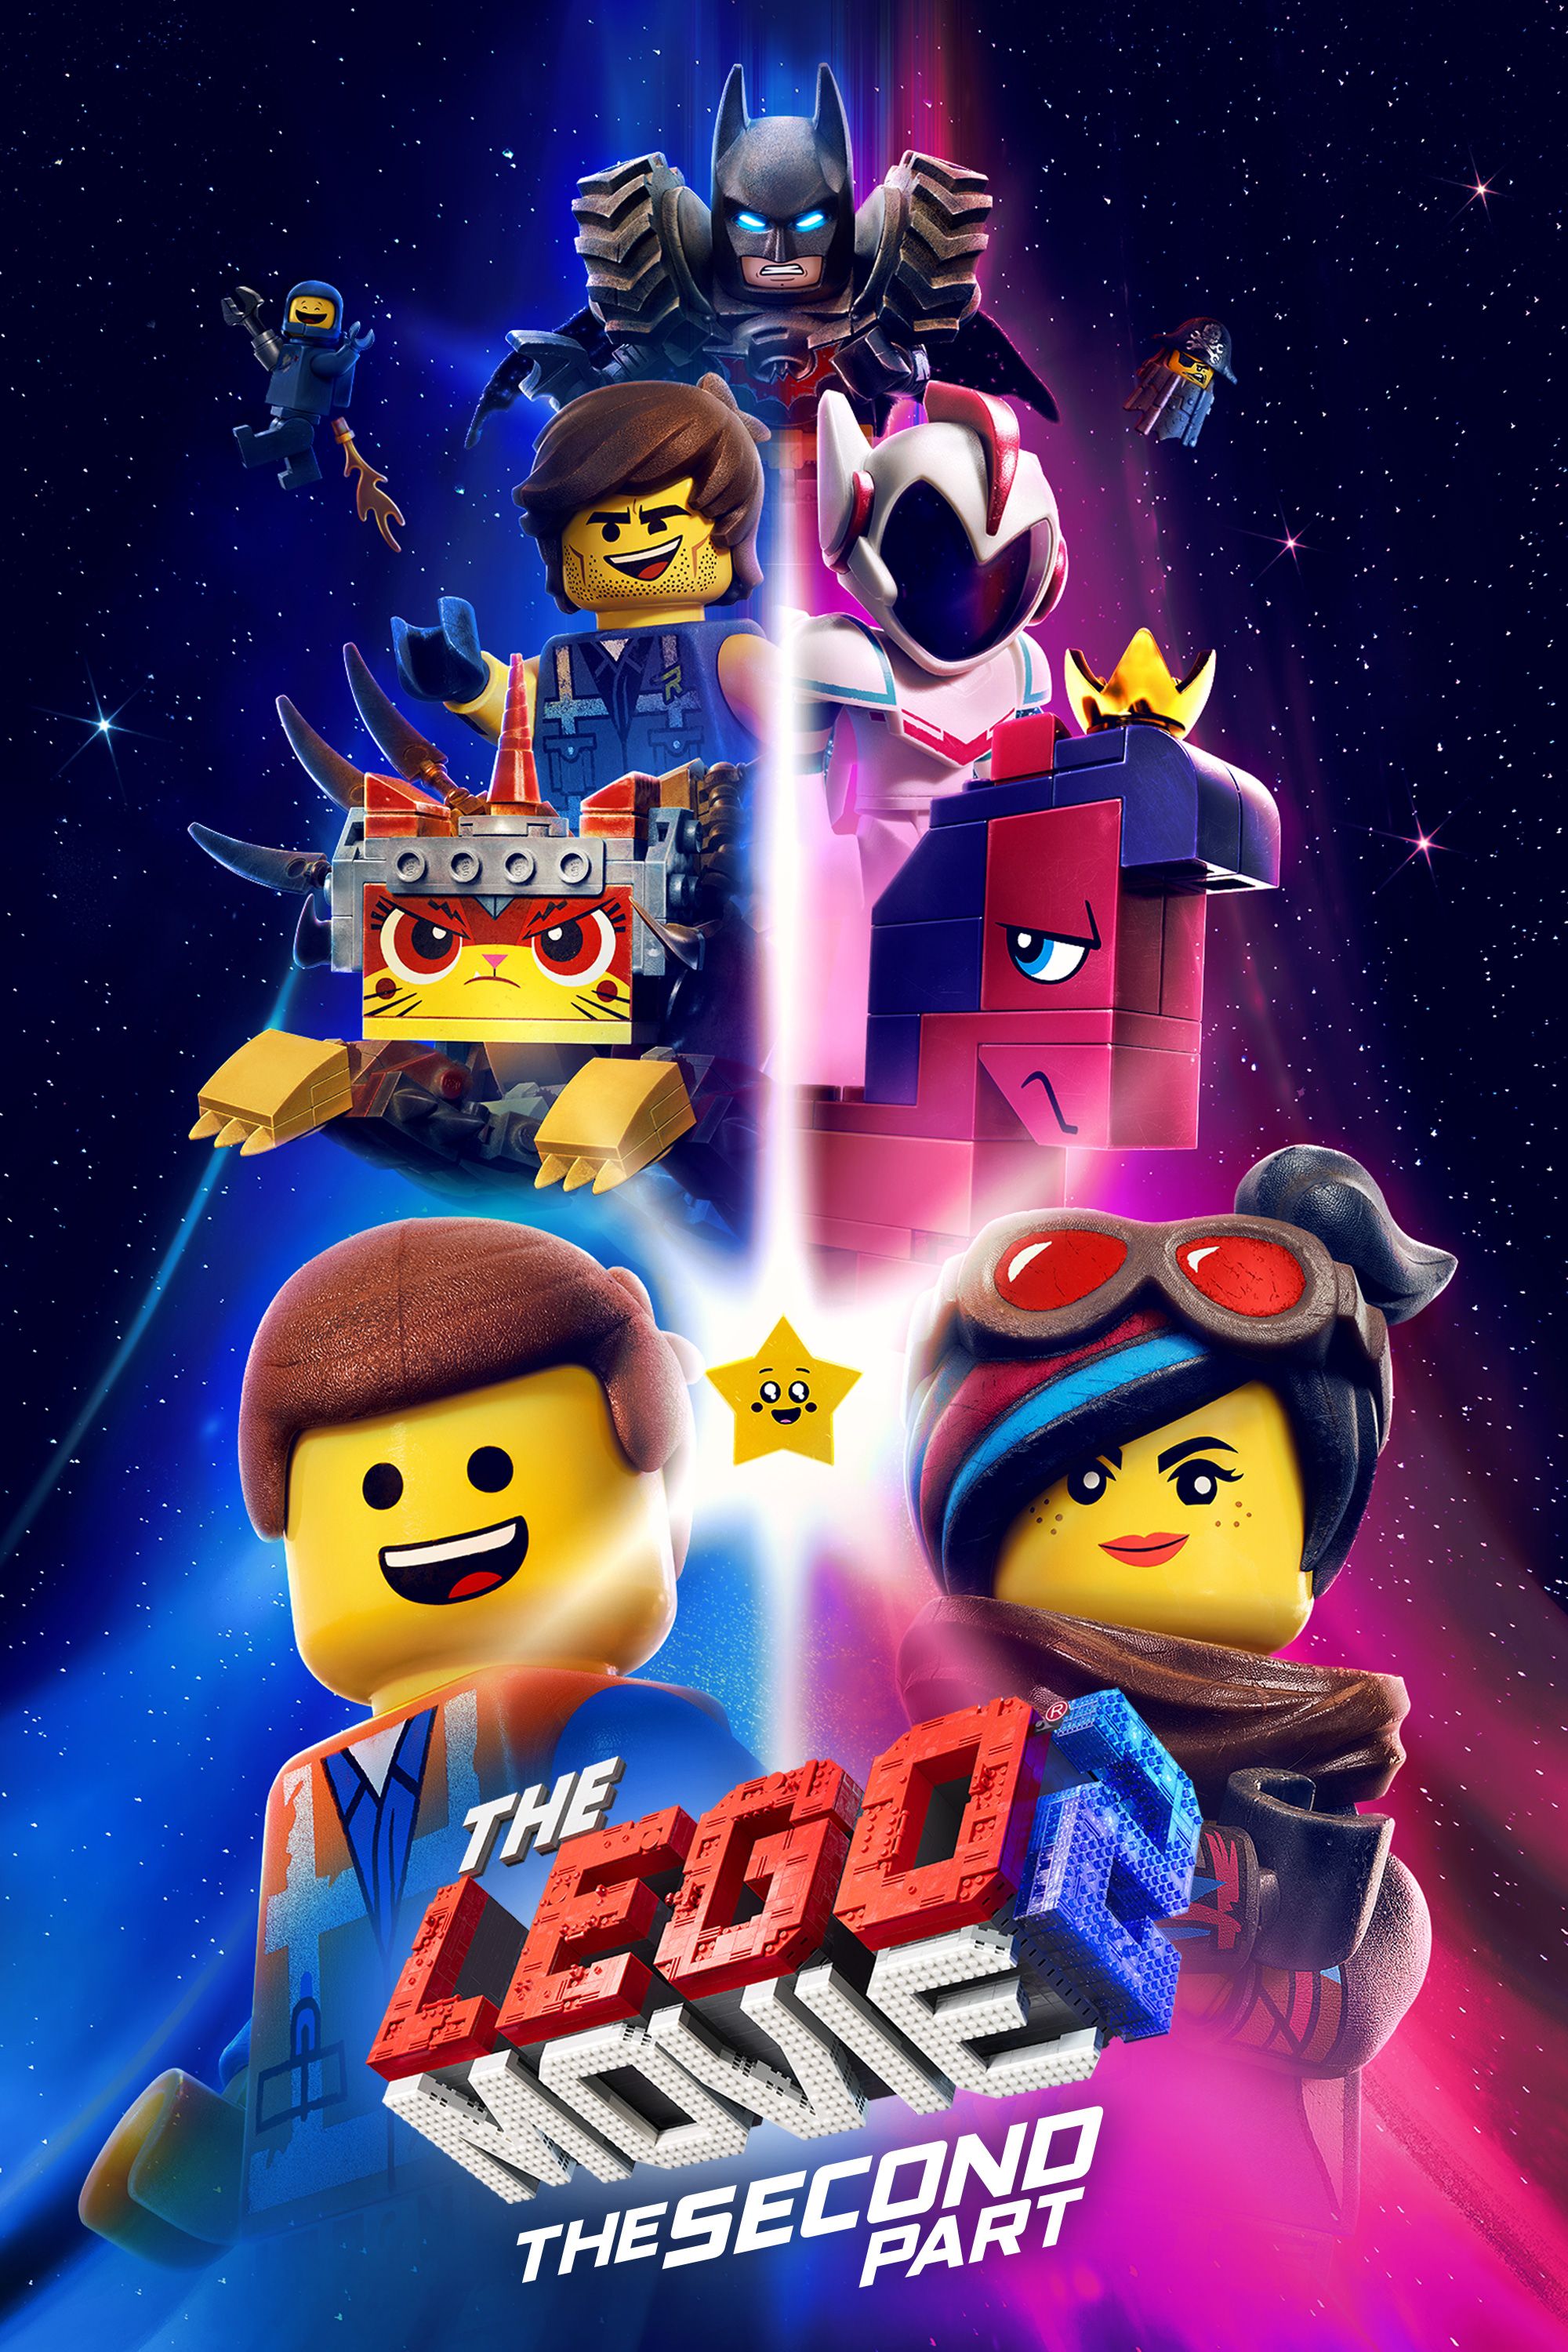 Tag et bad Eventyrer Mundskyl The LEGO Movie 2: The Second Part | Full Movie | Movies Anywhere